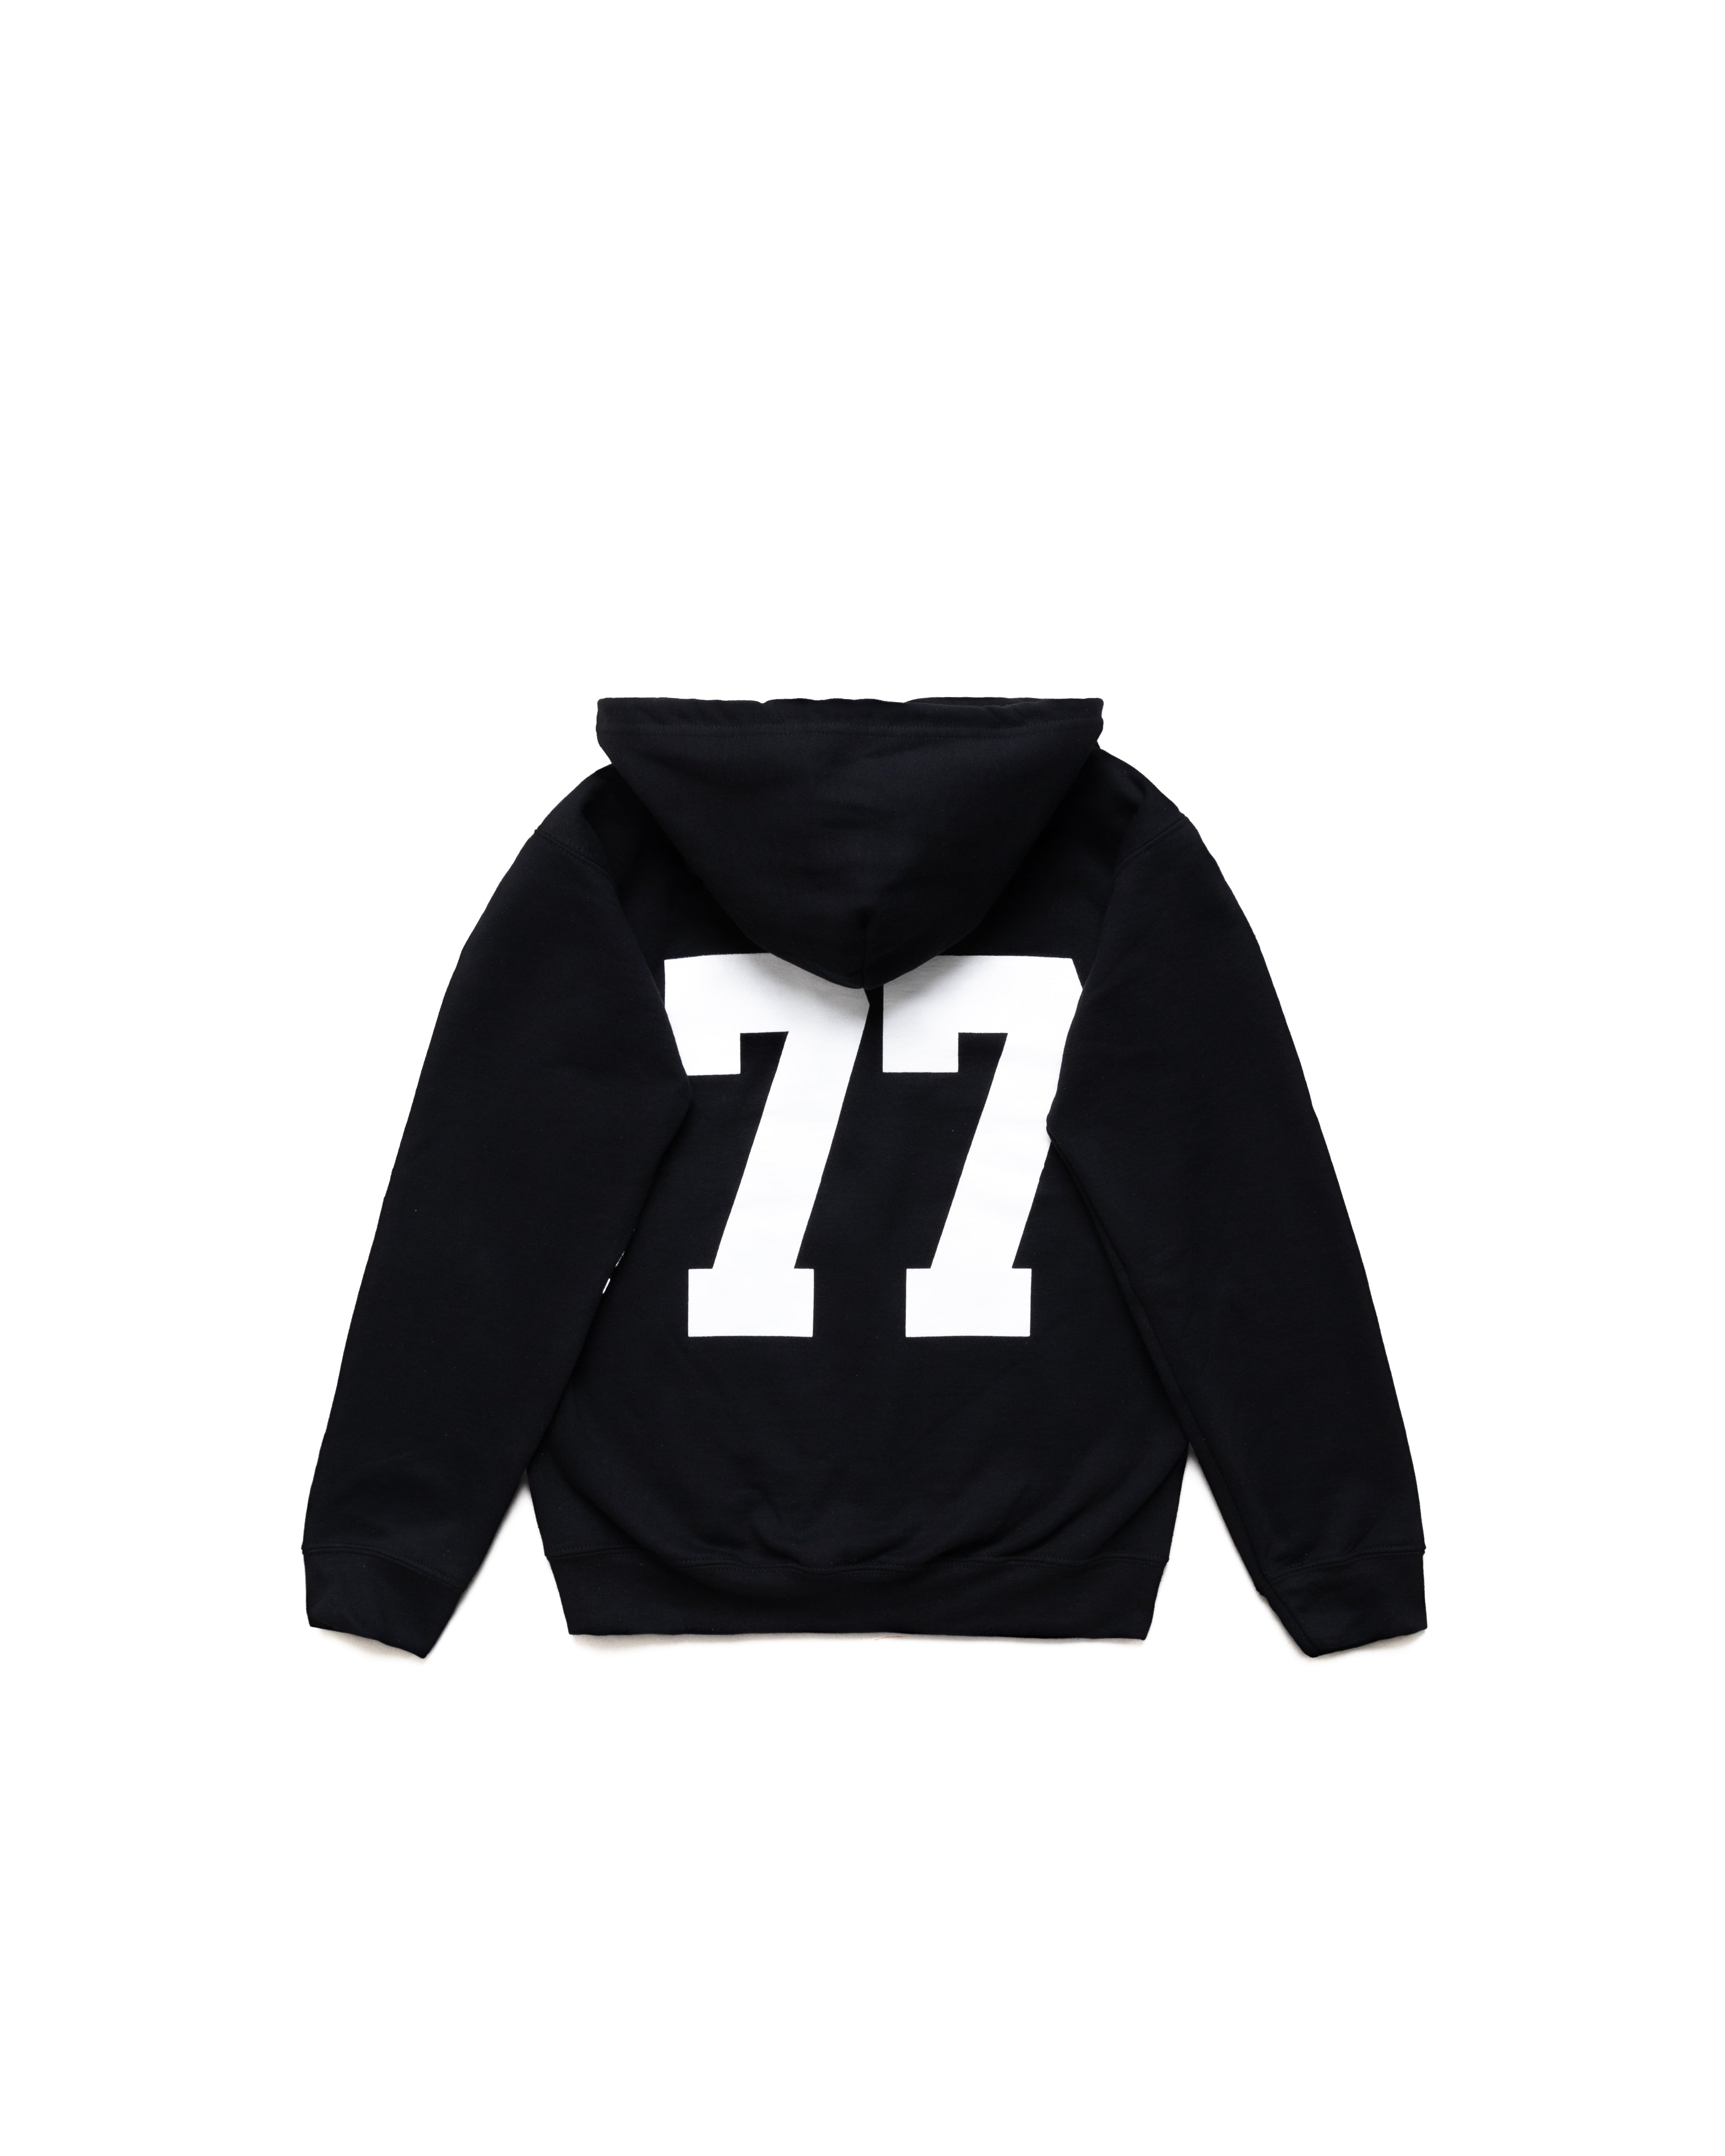 Product Image of 77 zip-up #2